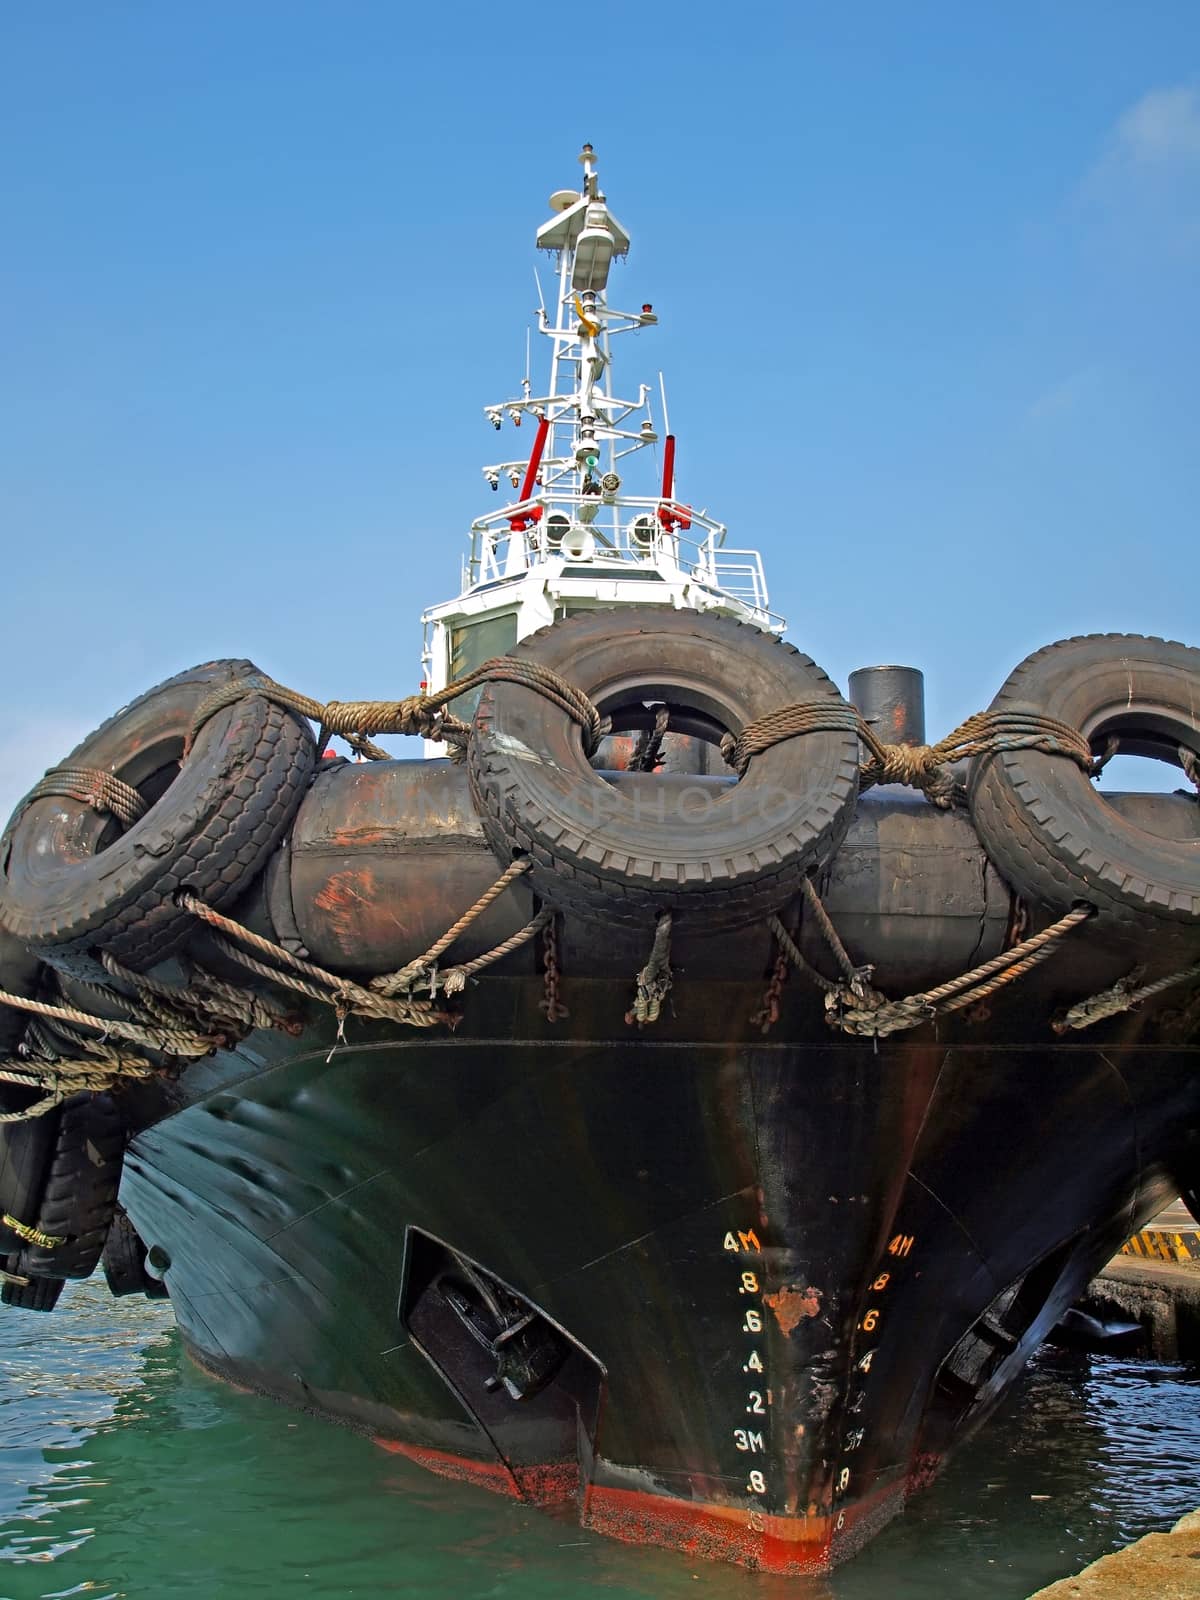 Tugboat with Large Tires by shiyali